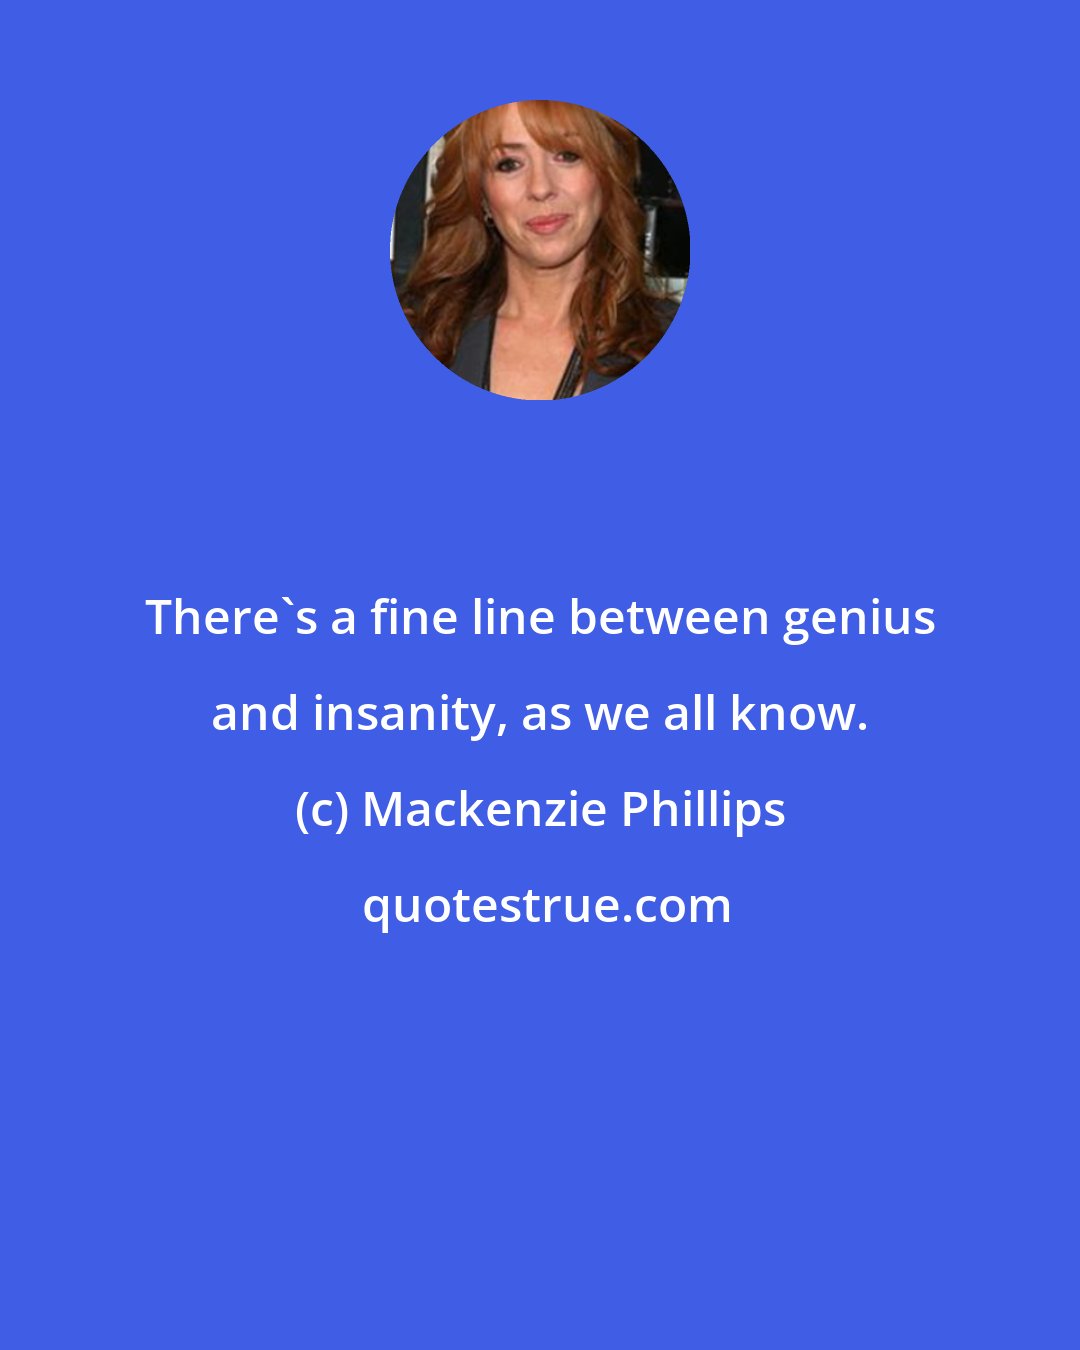 Mackenzie Phillips: There's a fine line between genius and insanity, as we all know.